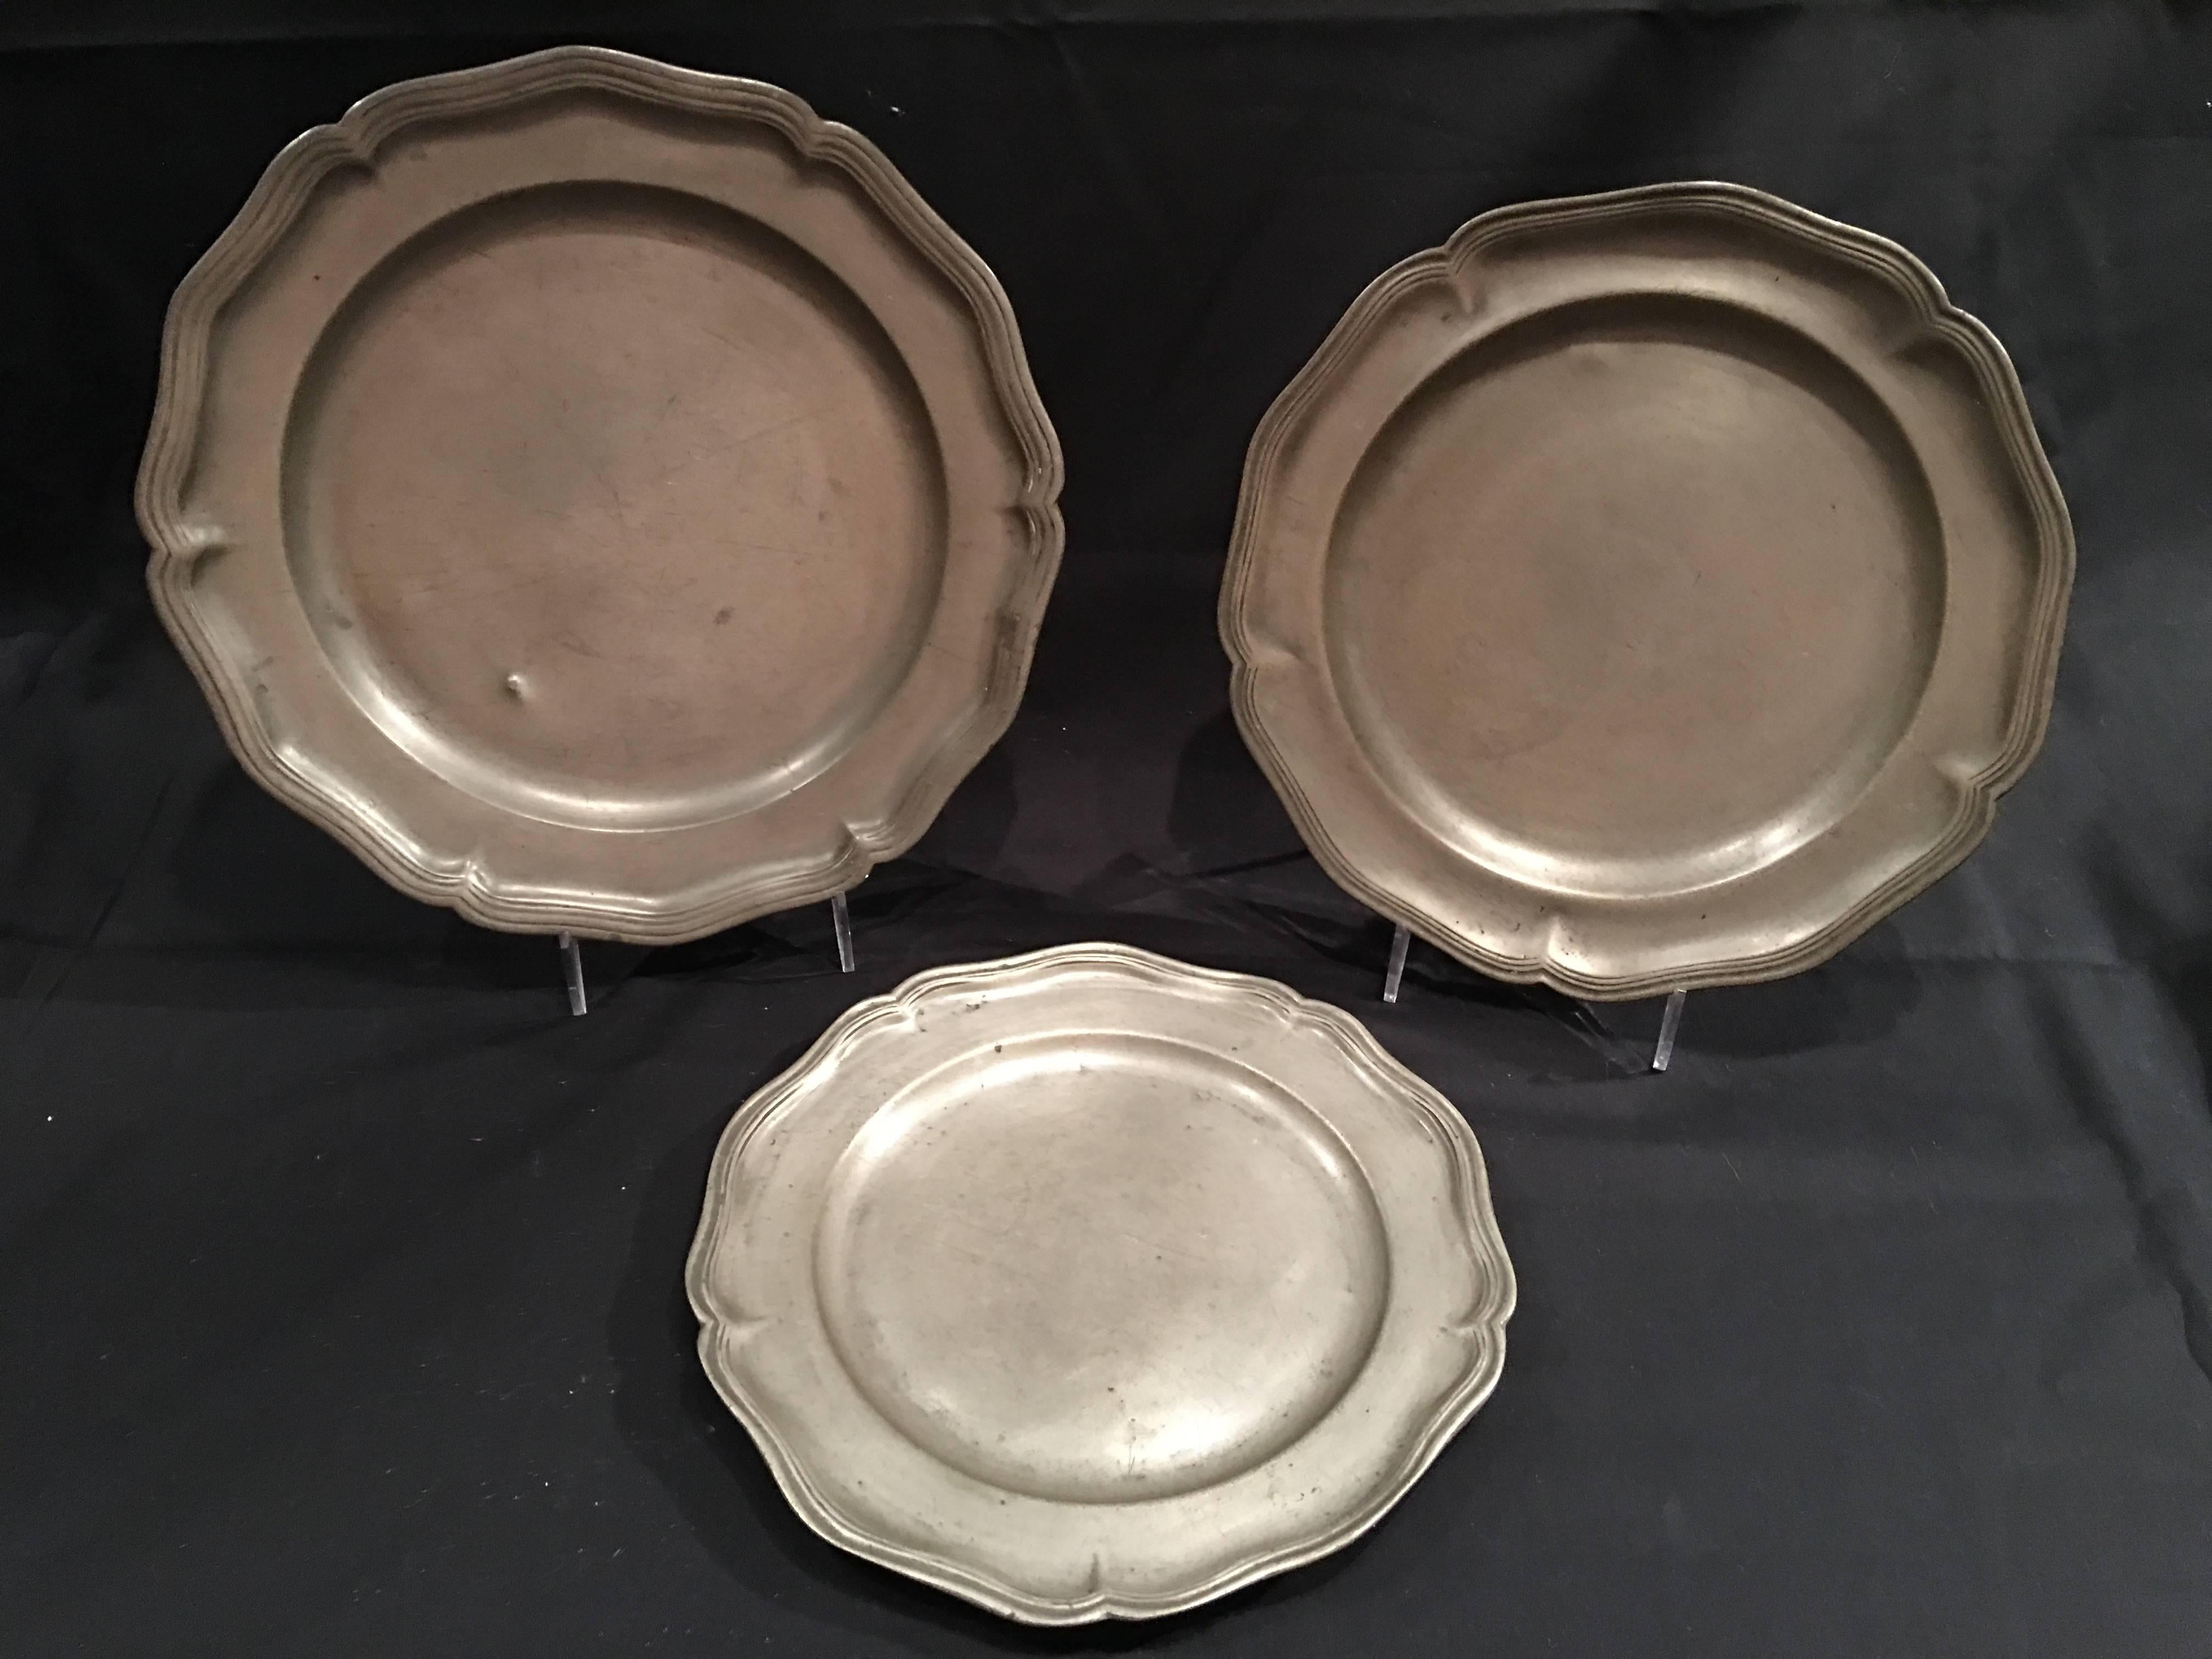 Set of three English Pewter plates or platters, 19th century. Different sizes.
Small 9.75